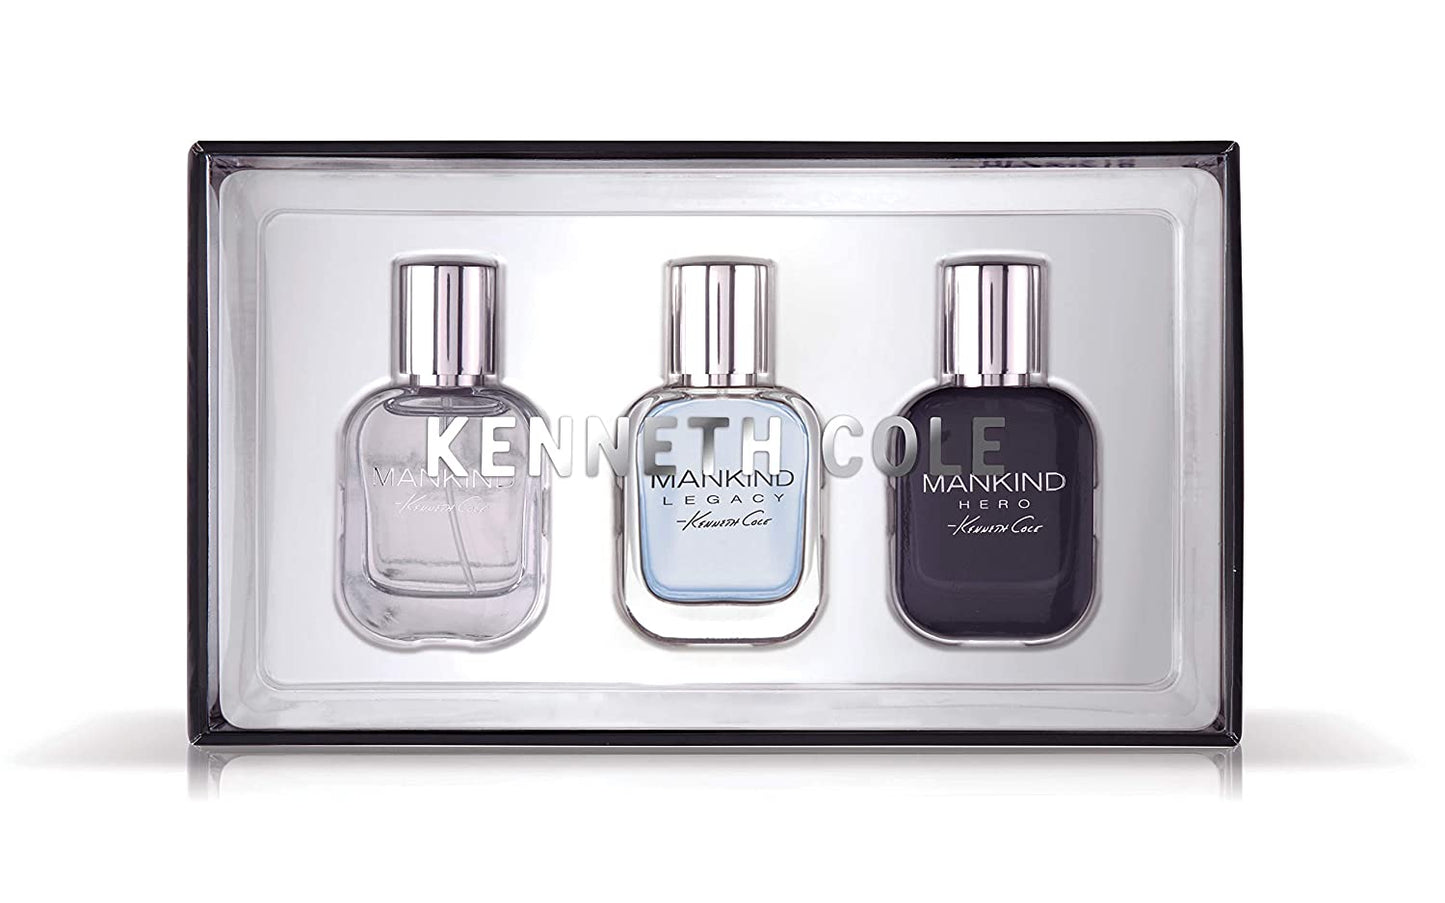 Kenneth Cole Mankind Coffret Set 1 Count(Pack of 3)